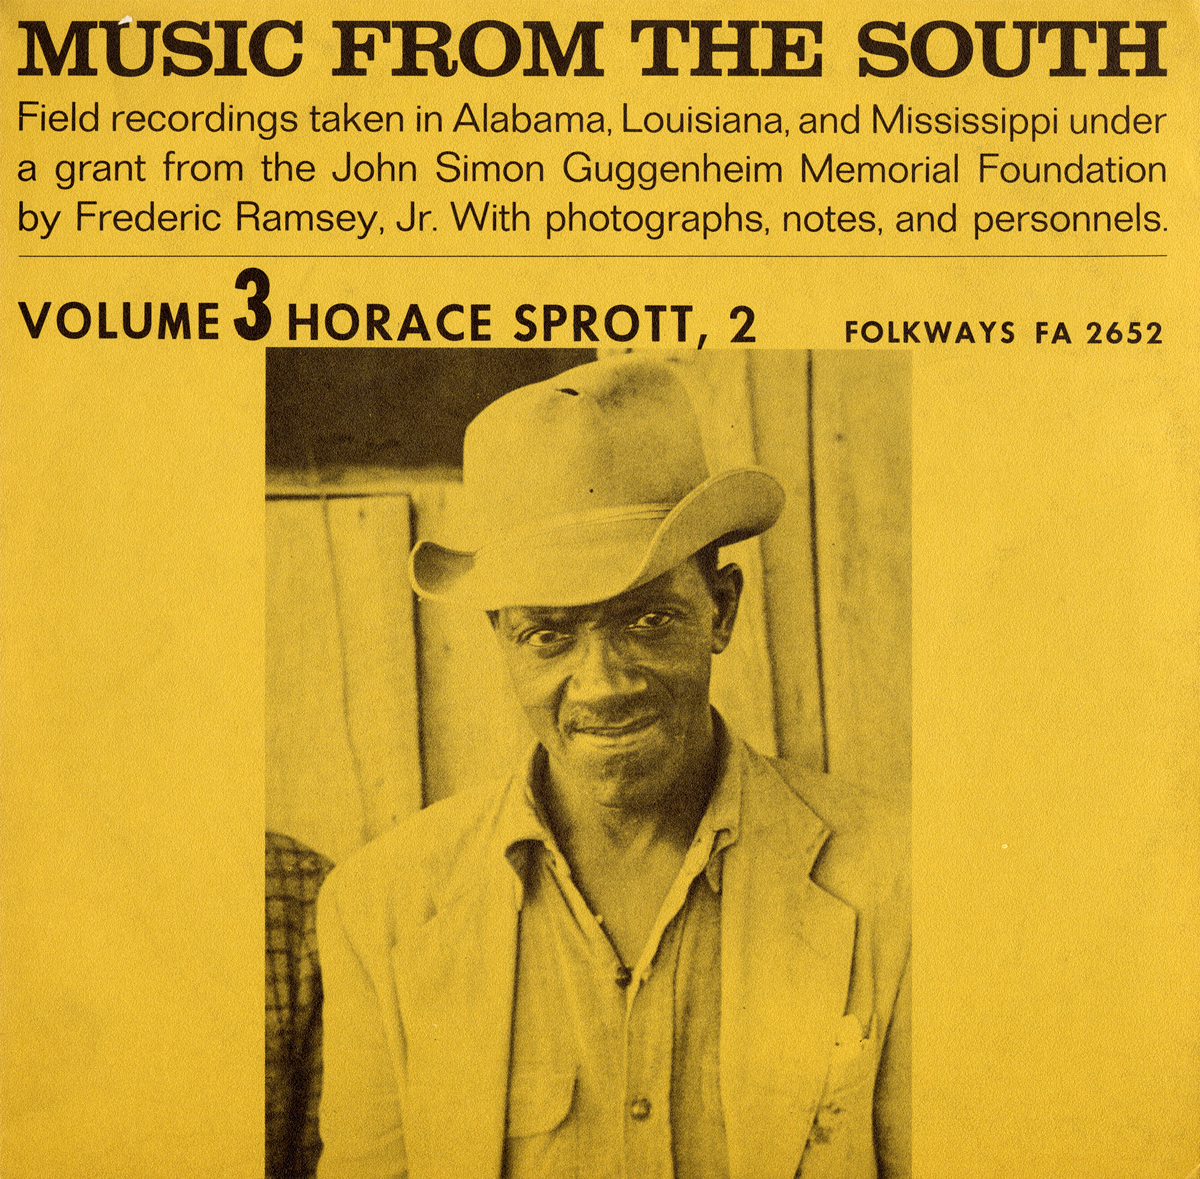 MUSIC FROM THE SOUTH VOL. 3: HORACE SPROTT 2